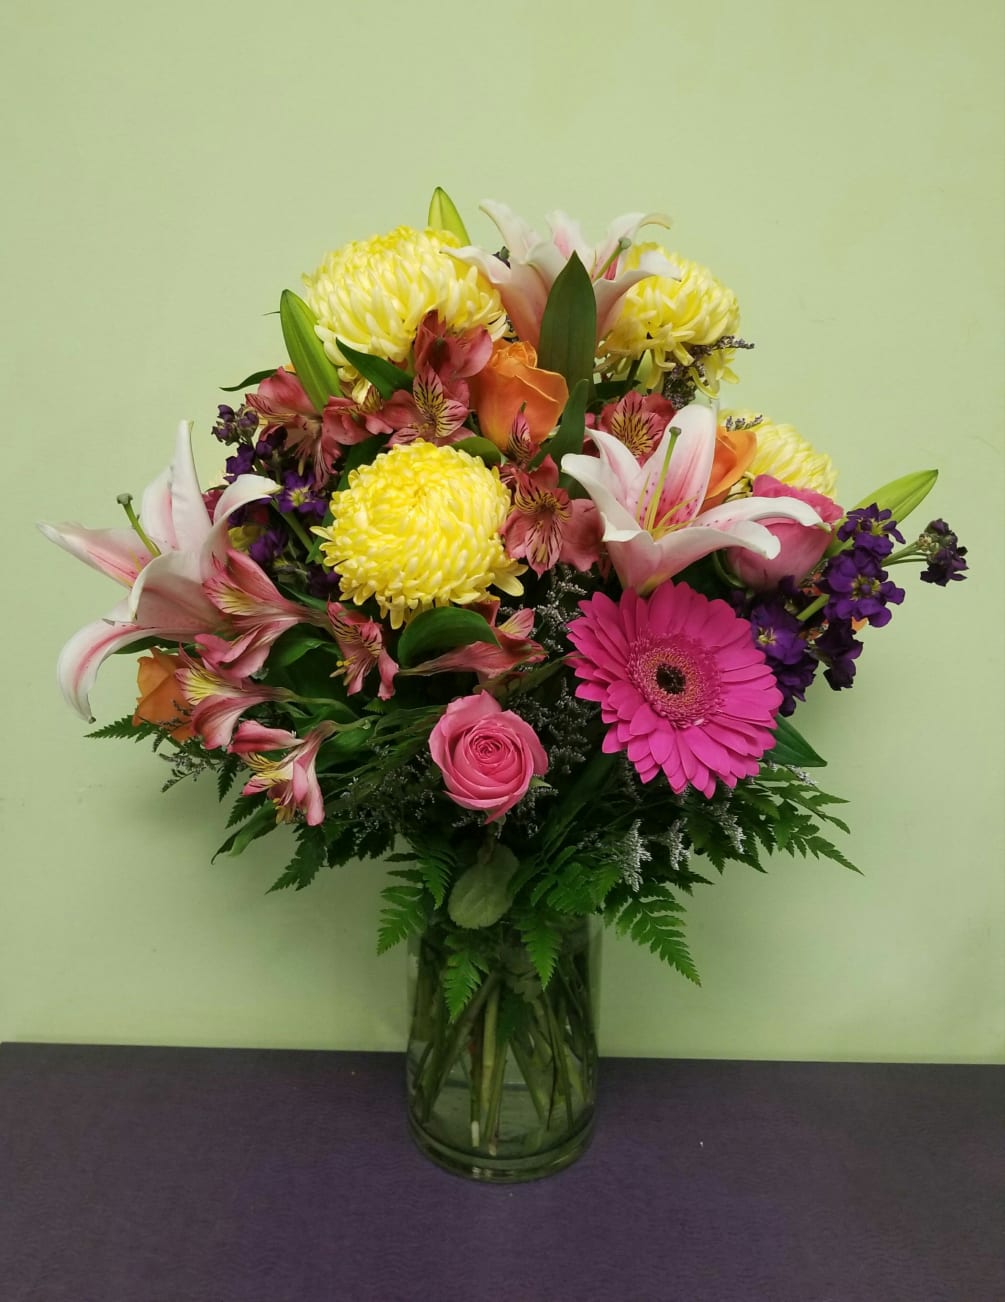 This arrangement is truly stunning. It is full of color and beauty